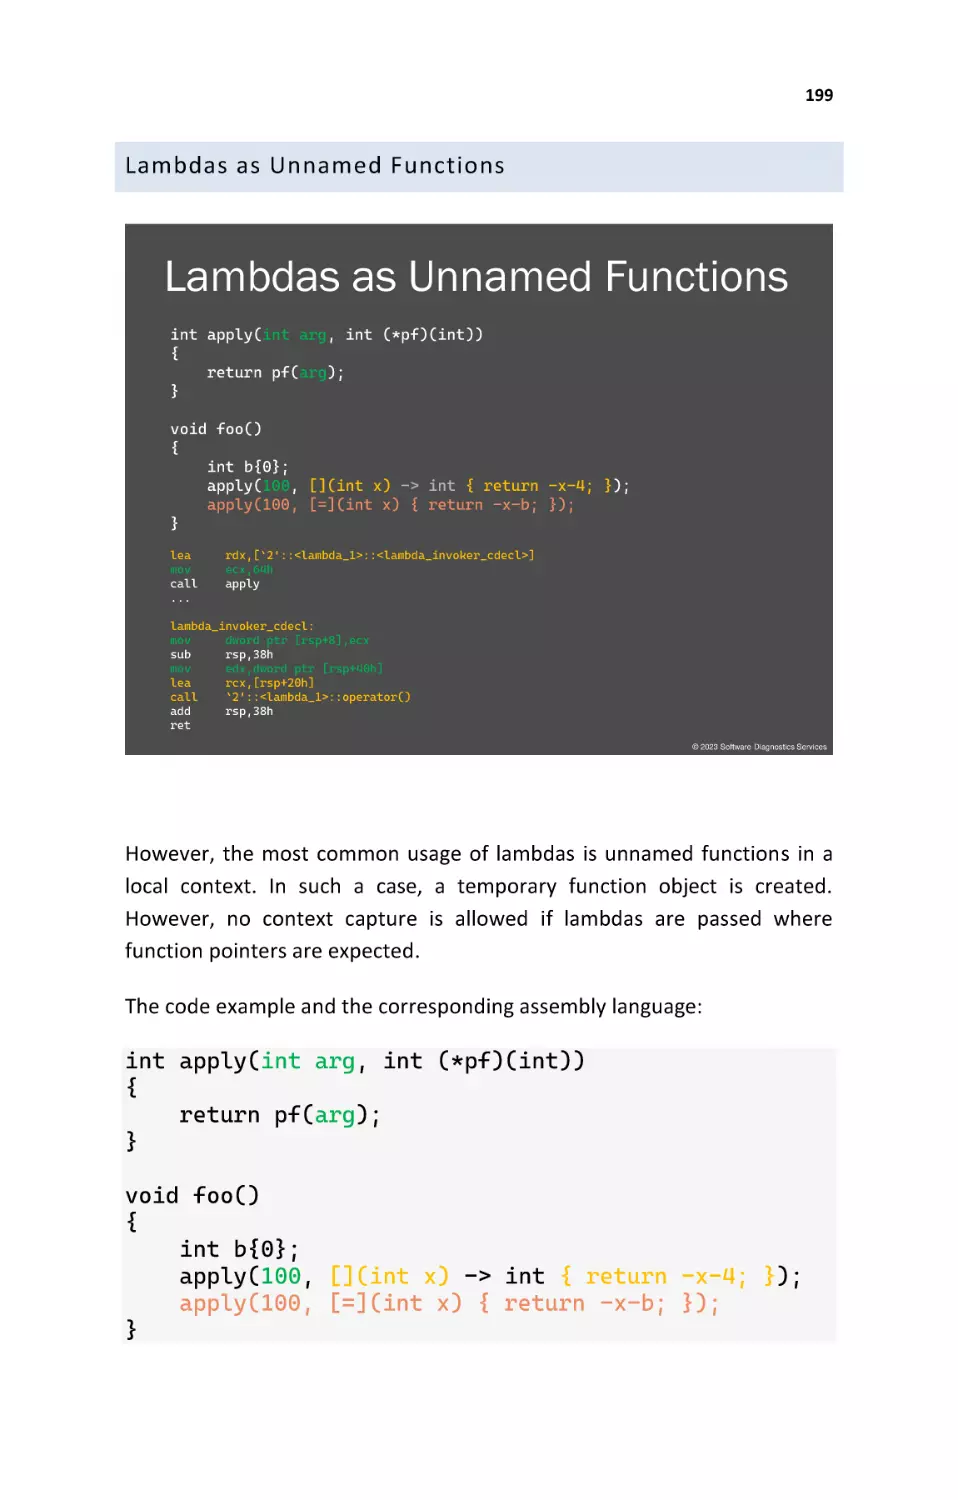 Lambdas as Unnamed Functions